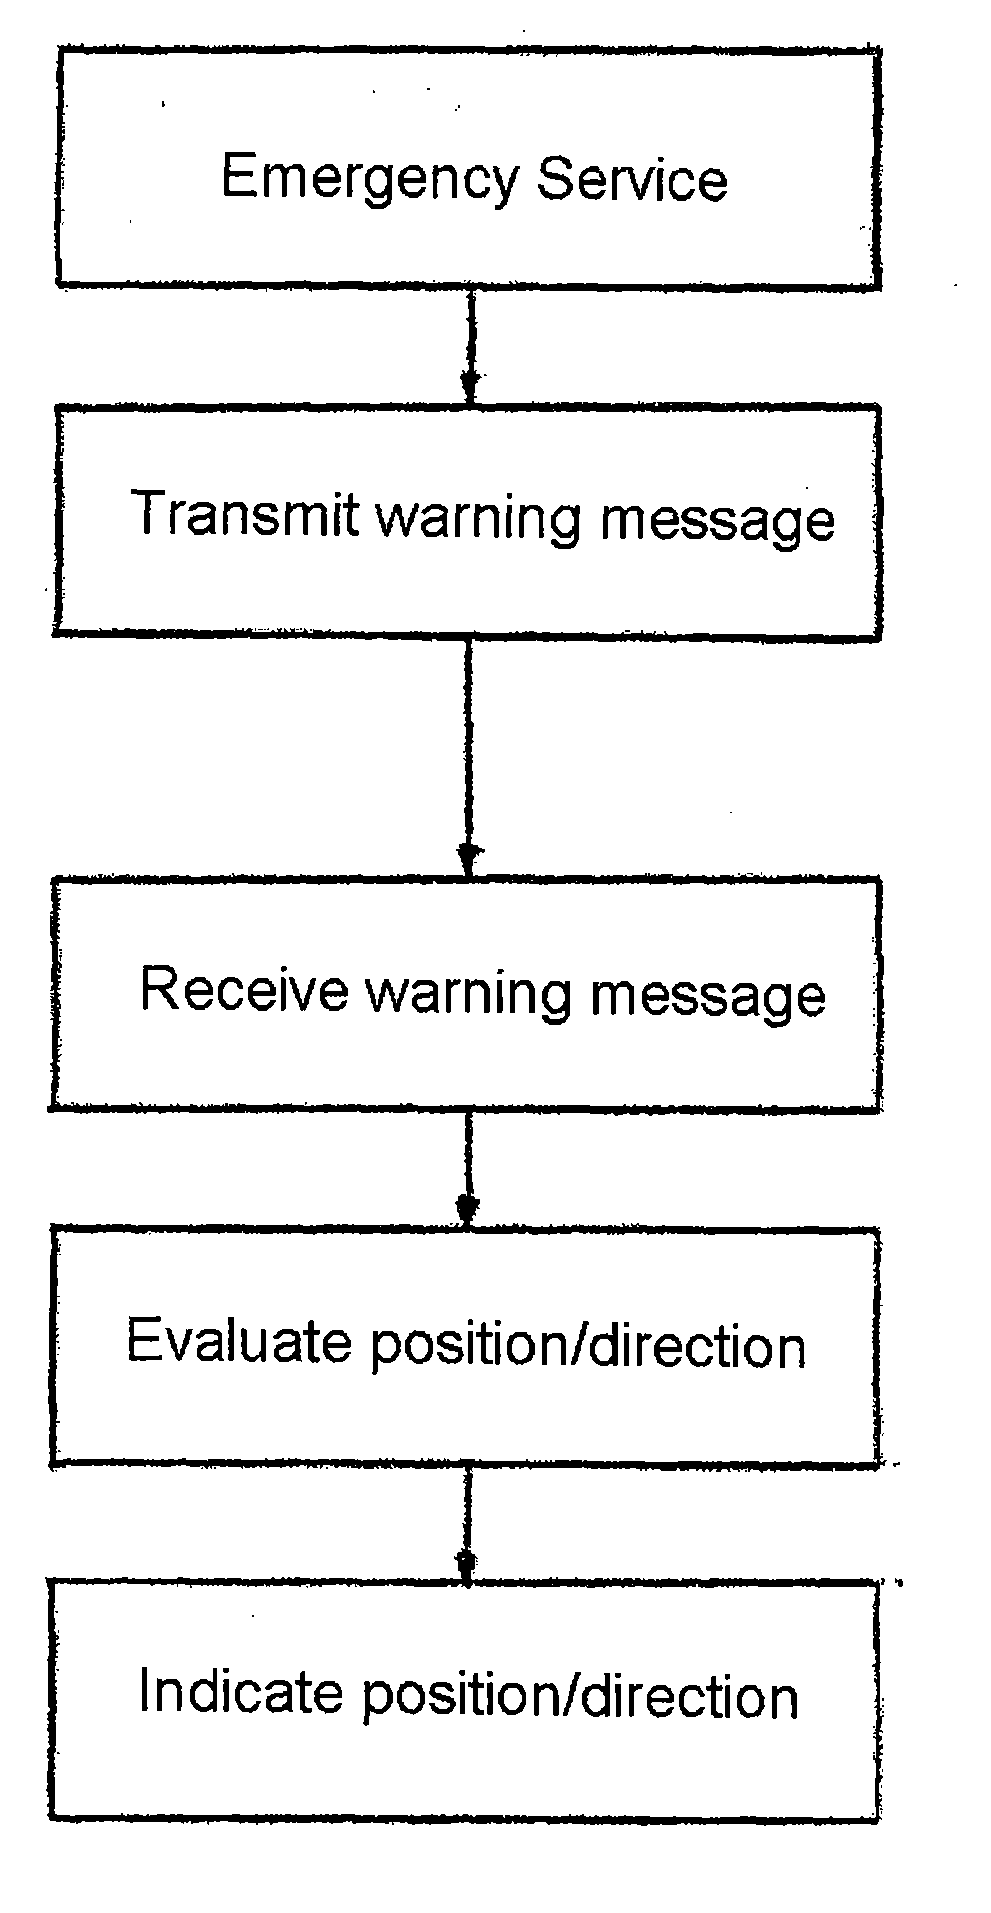 Method and apparatus for warning of emergency vehicles in emergency service